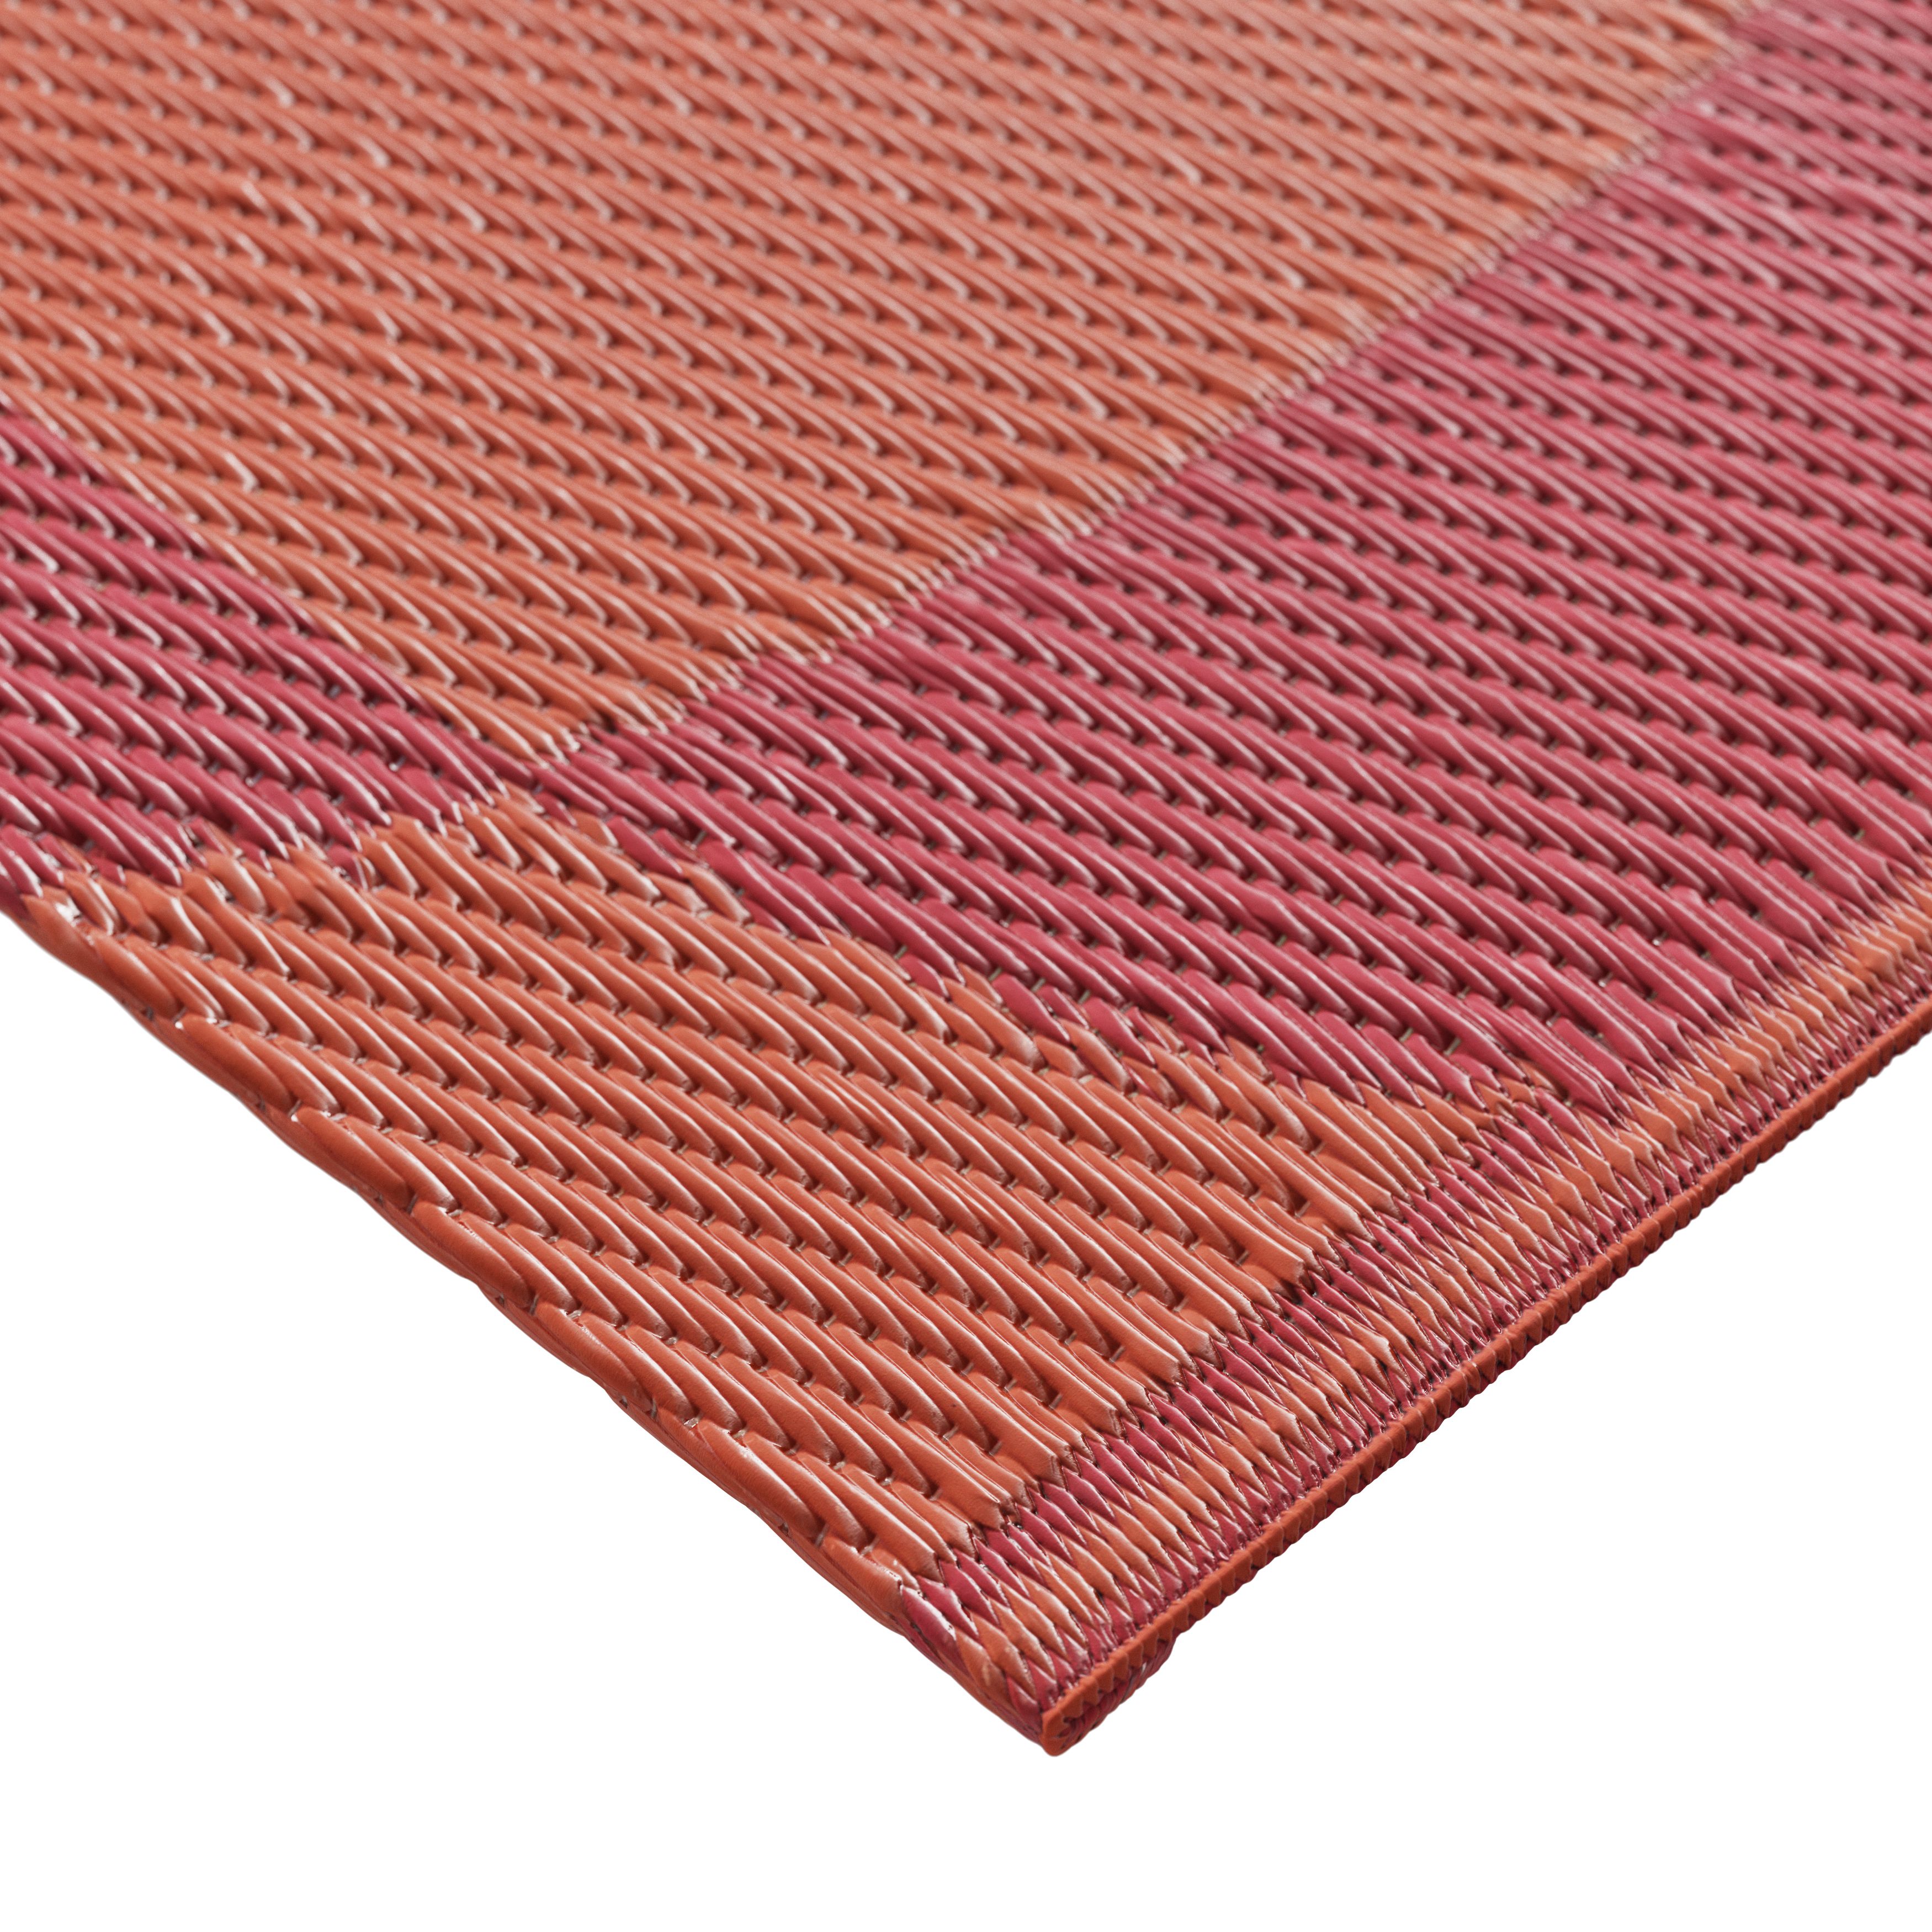 GoodHome Malaita Blue & Red Fragment Woven effect Reversible Small Outdoor Rug 180cmx70cm